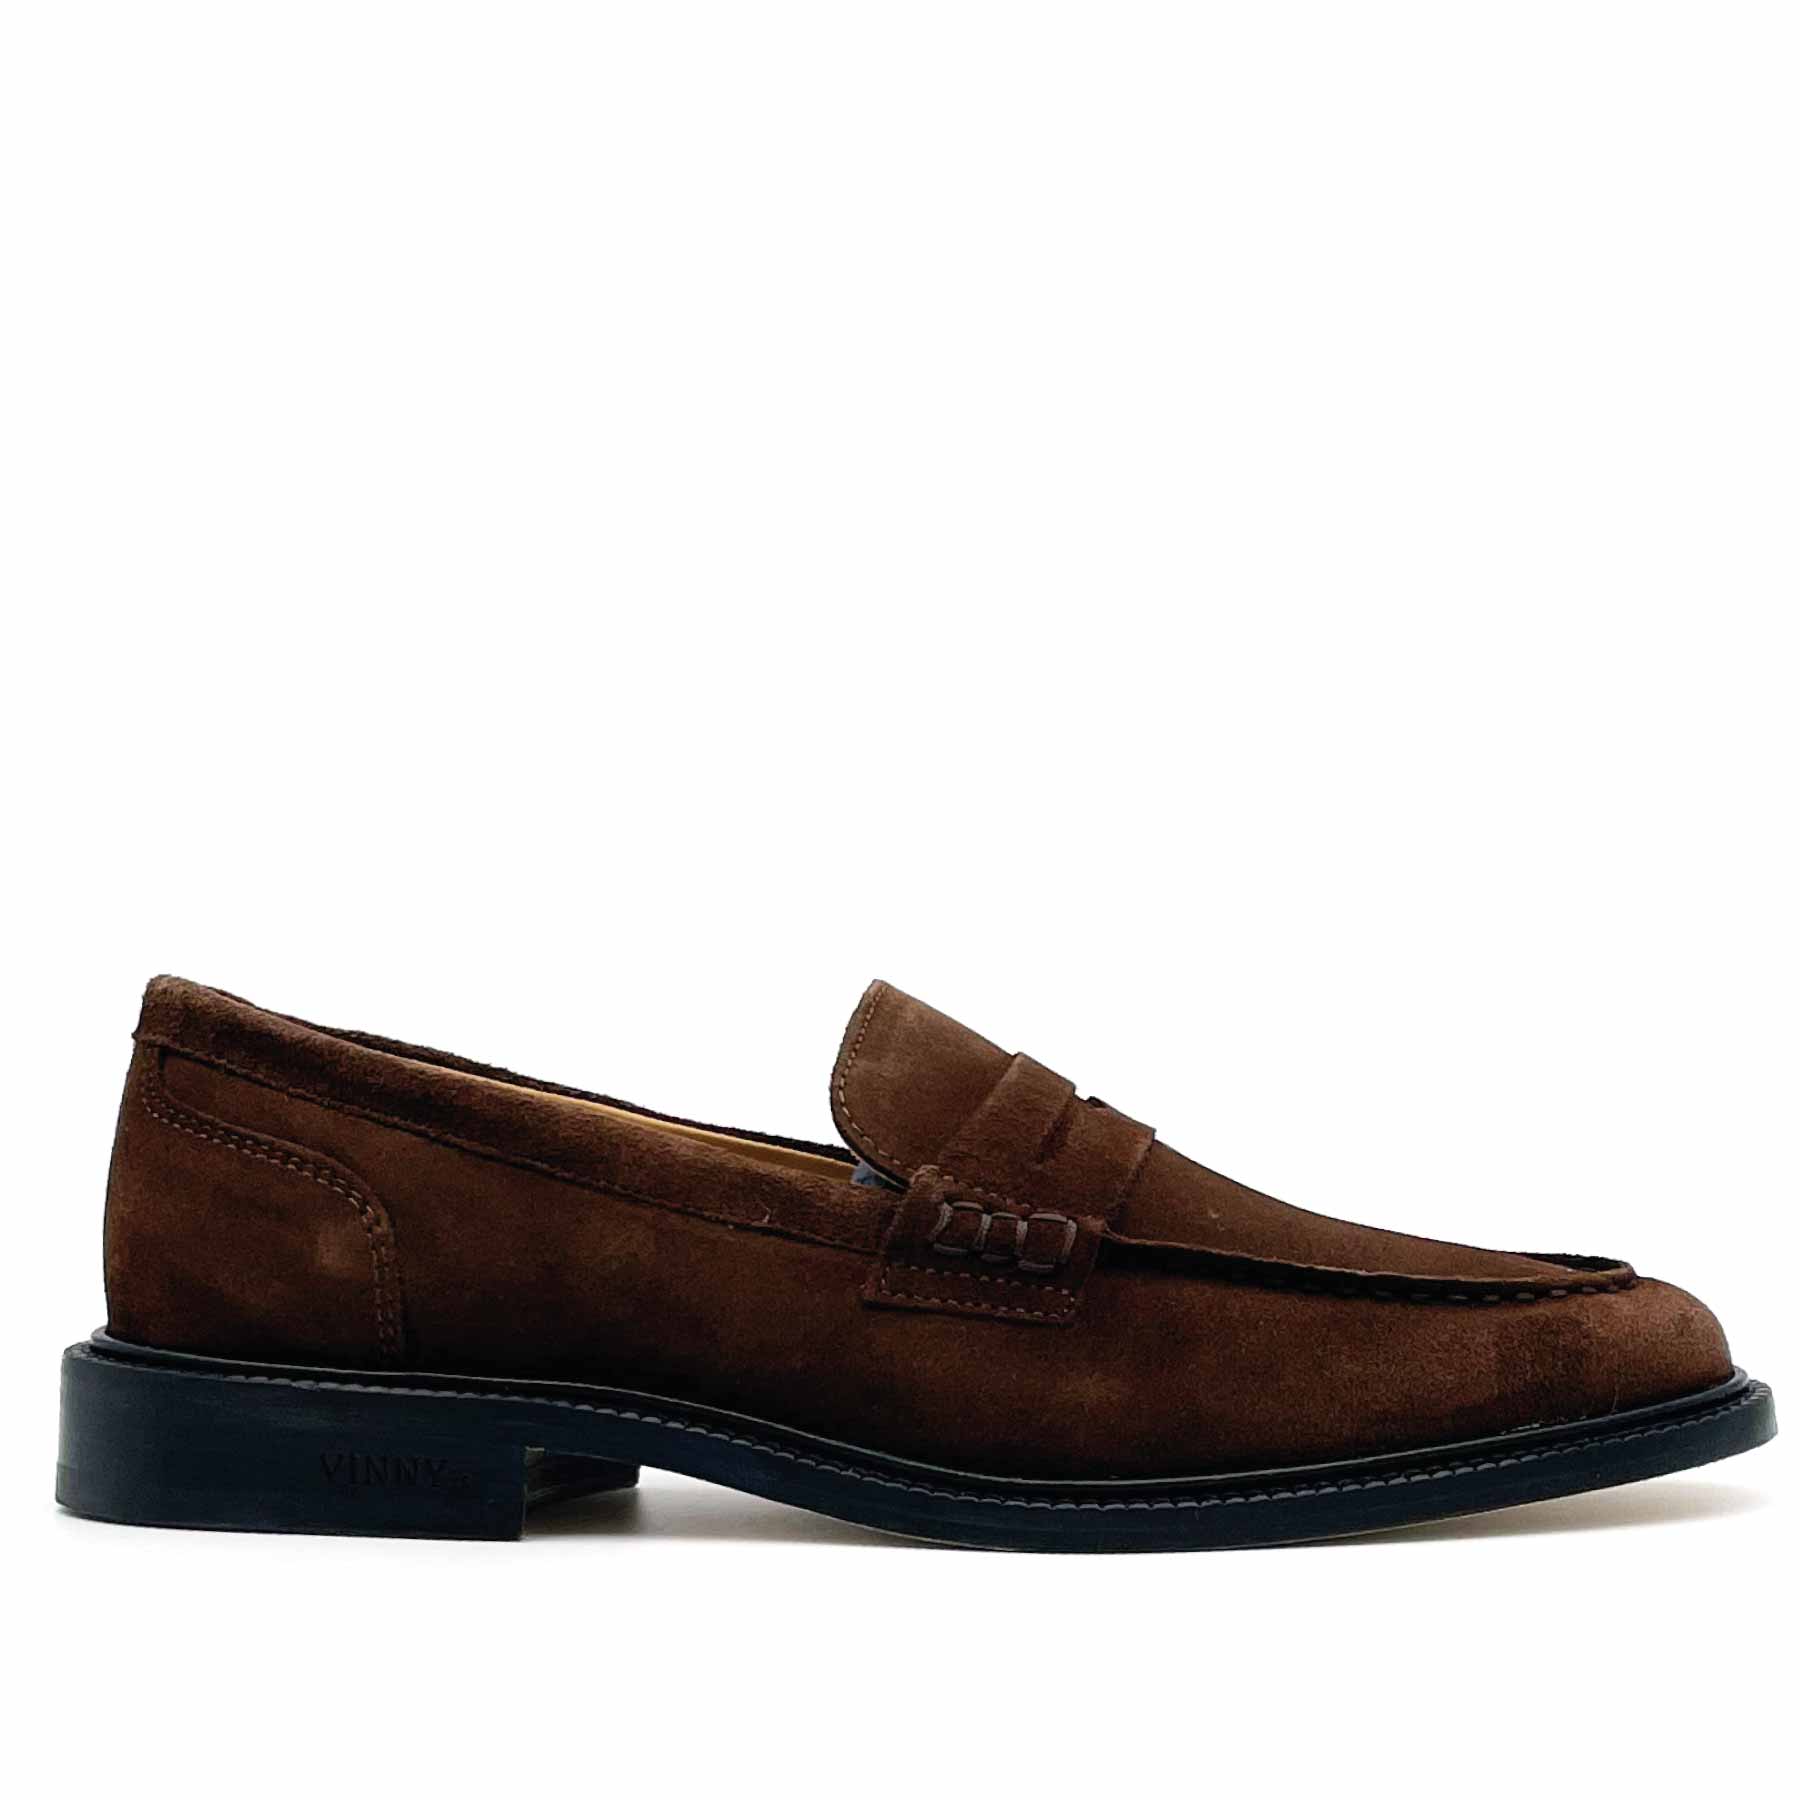 Townee Penny Loafer Light Brown Suede